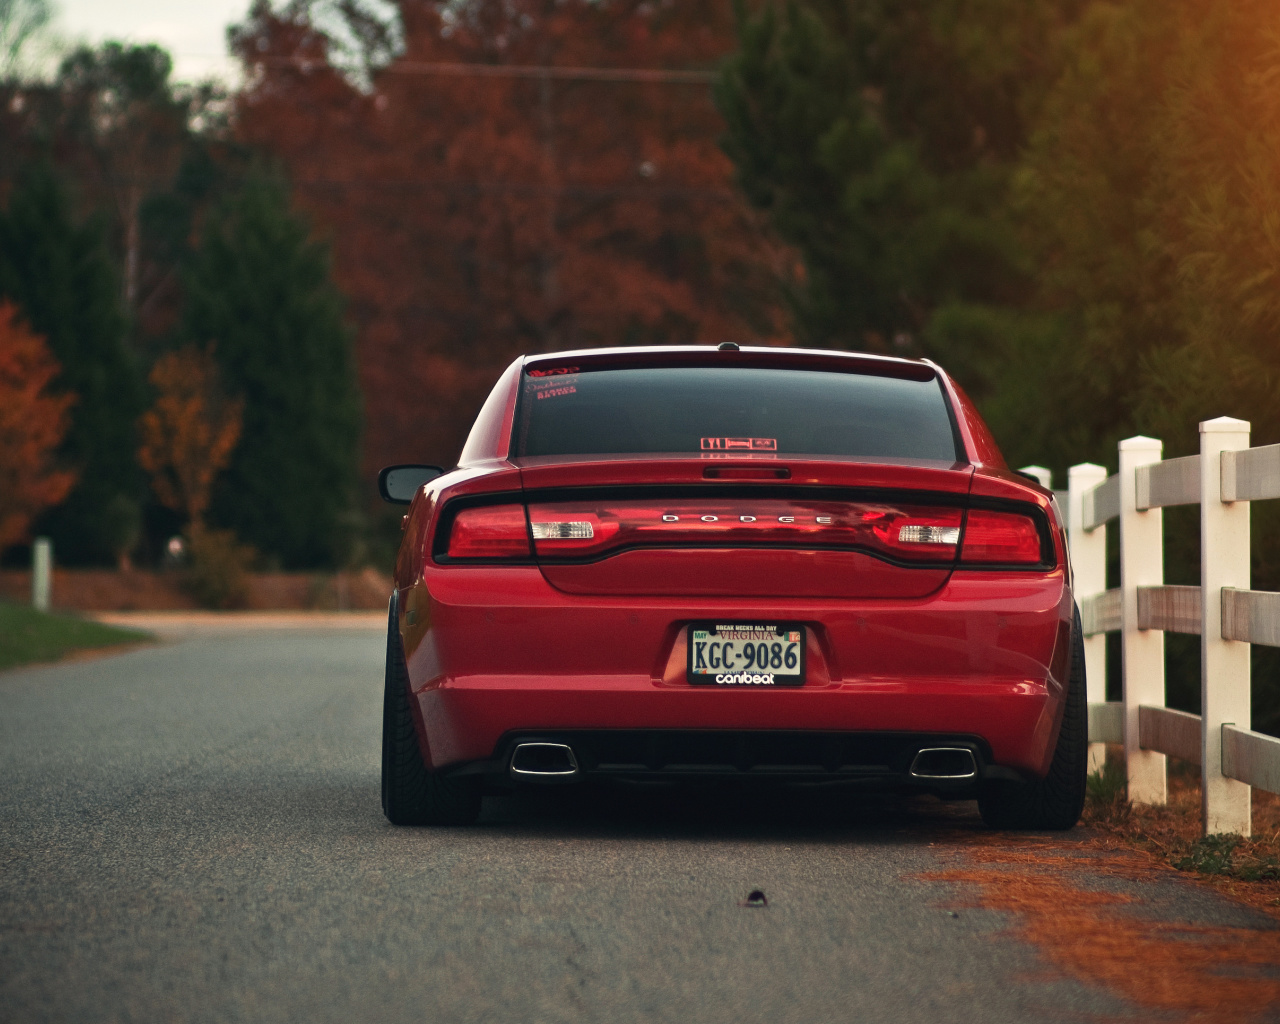 Dodge Charger RT 5 7L wallpaper 1280x1024